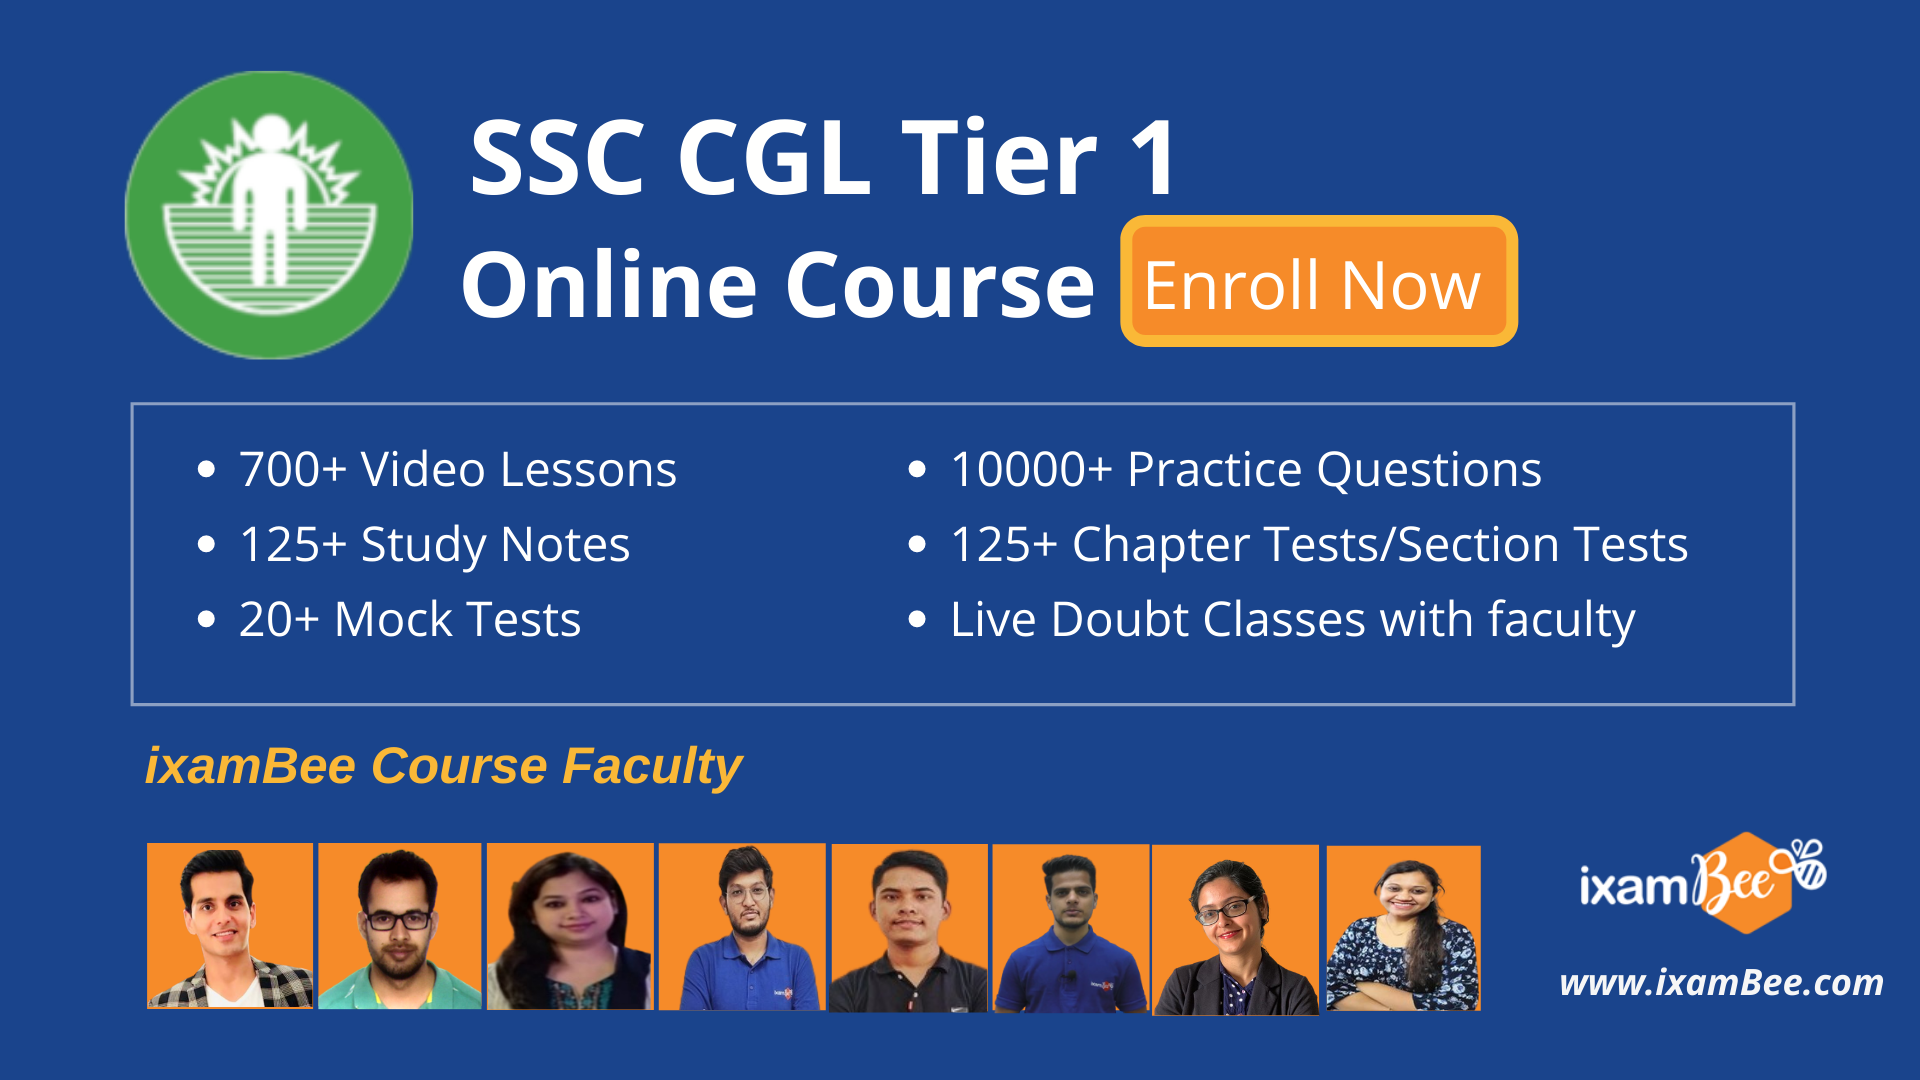 SSC CGL Tier 1 online course